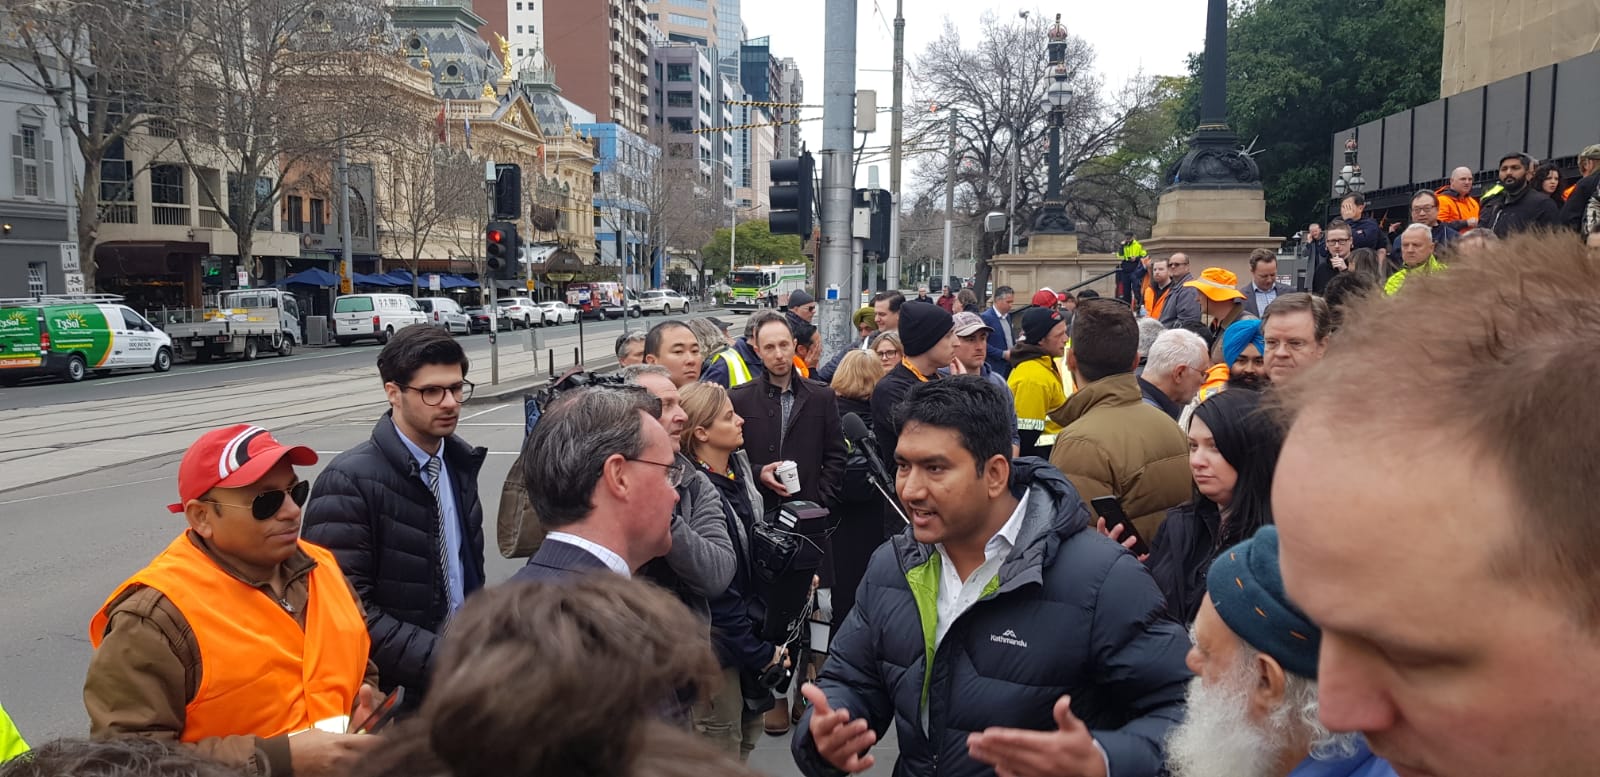 sbs-language-solar-installers-protest-against-victorian-government-s